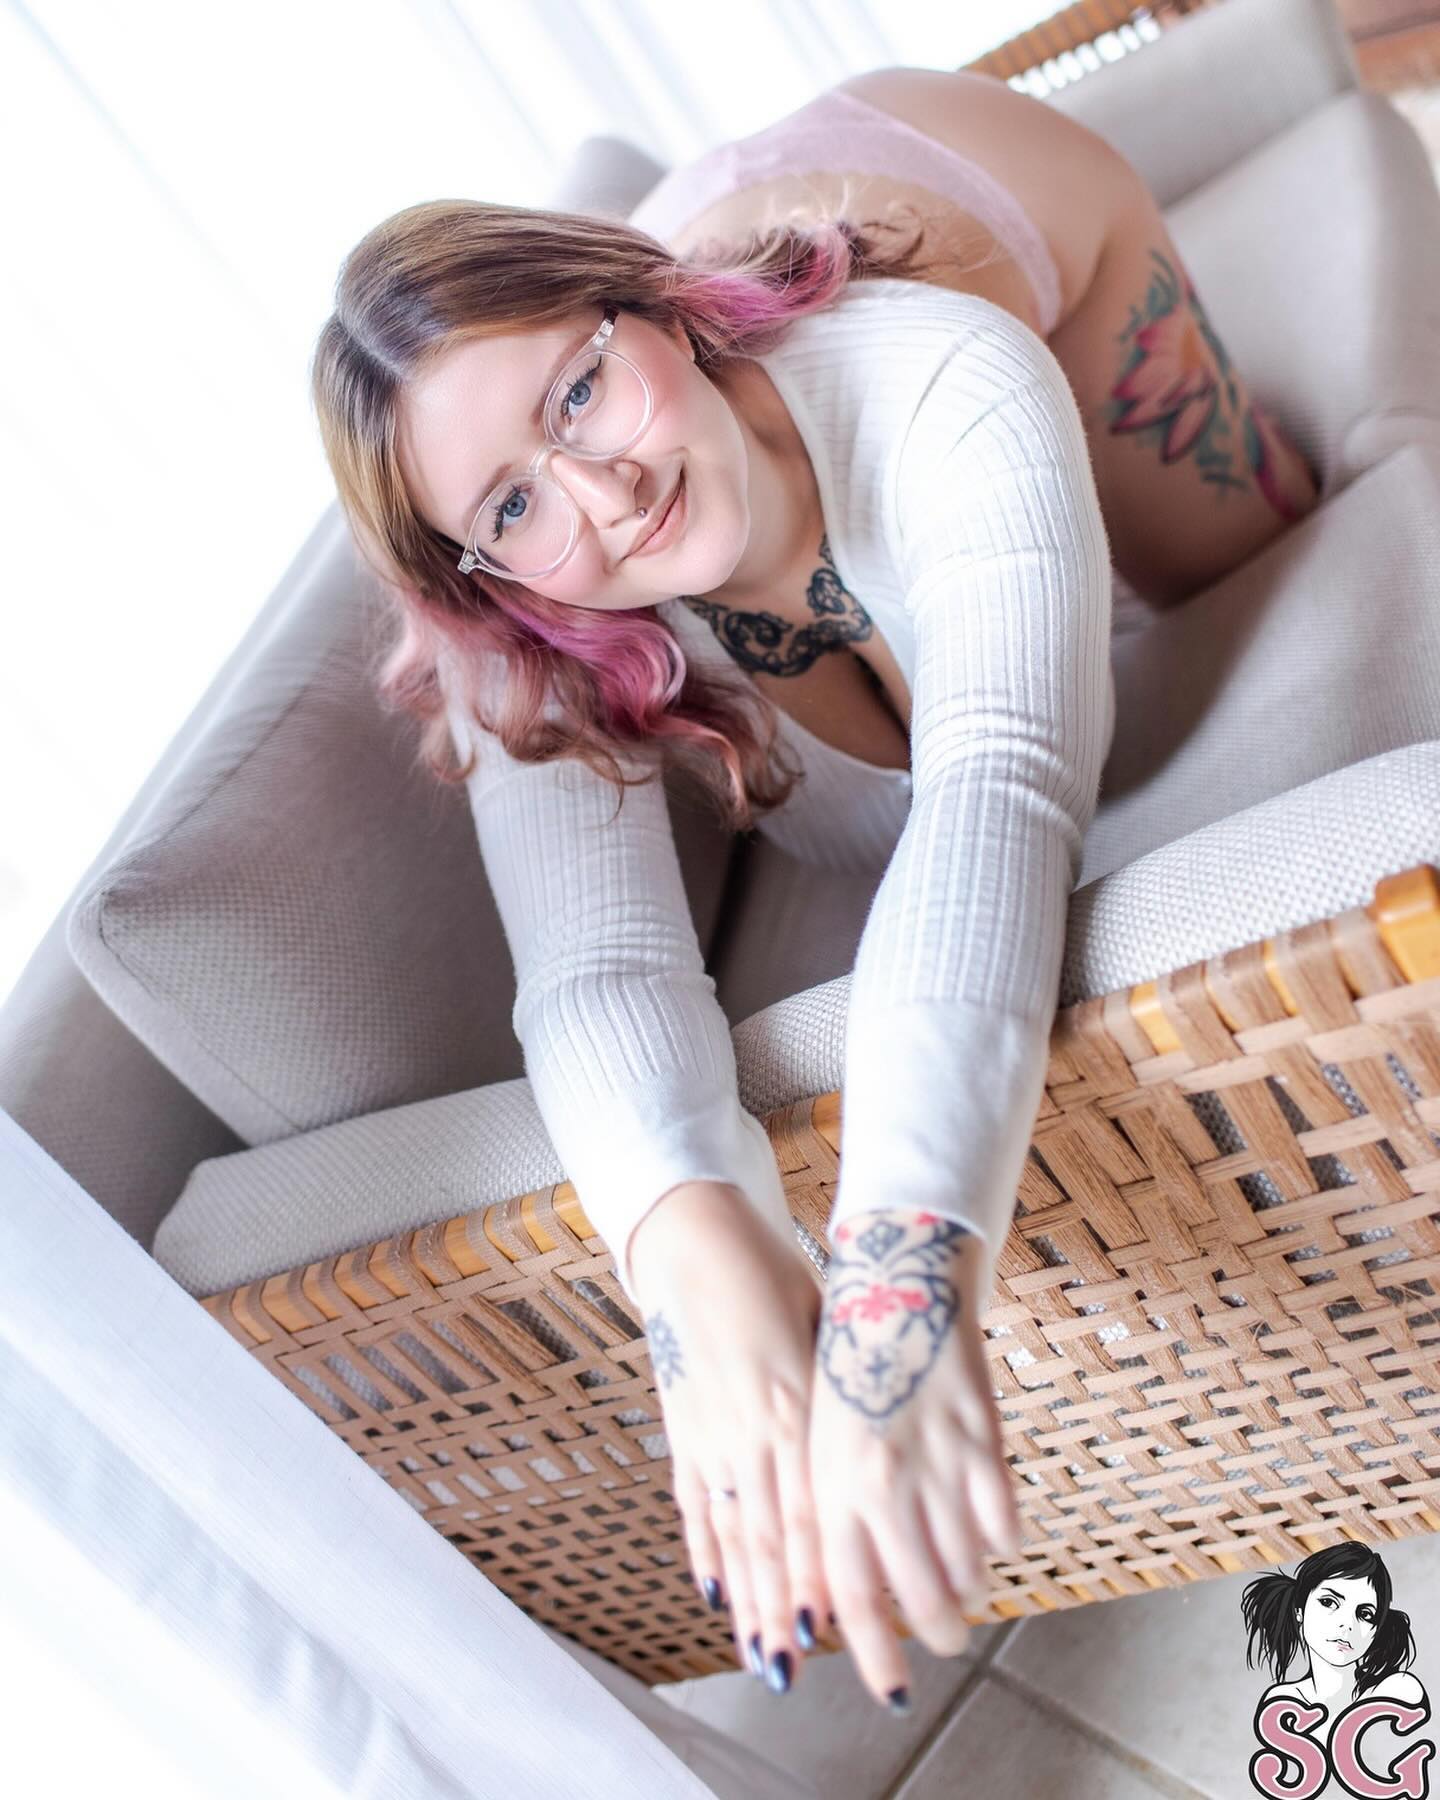 My new photoset “Ray of light” now in member review on @suicidegirls 
📷: @thimeowph